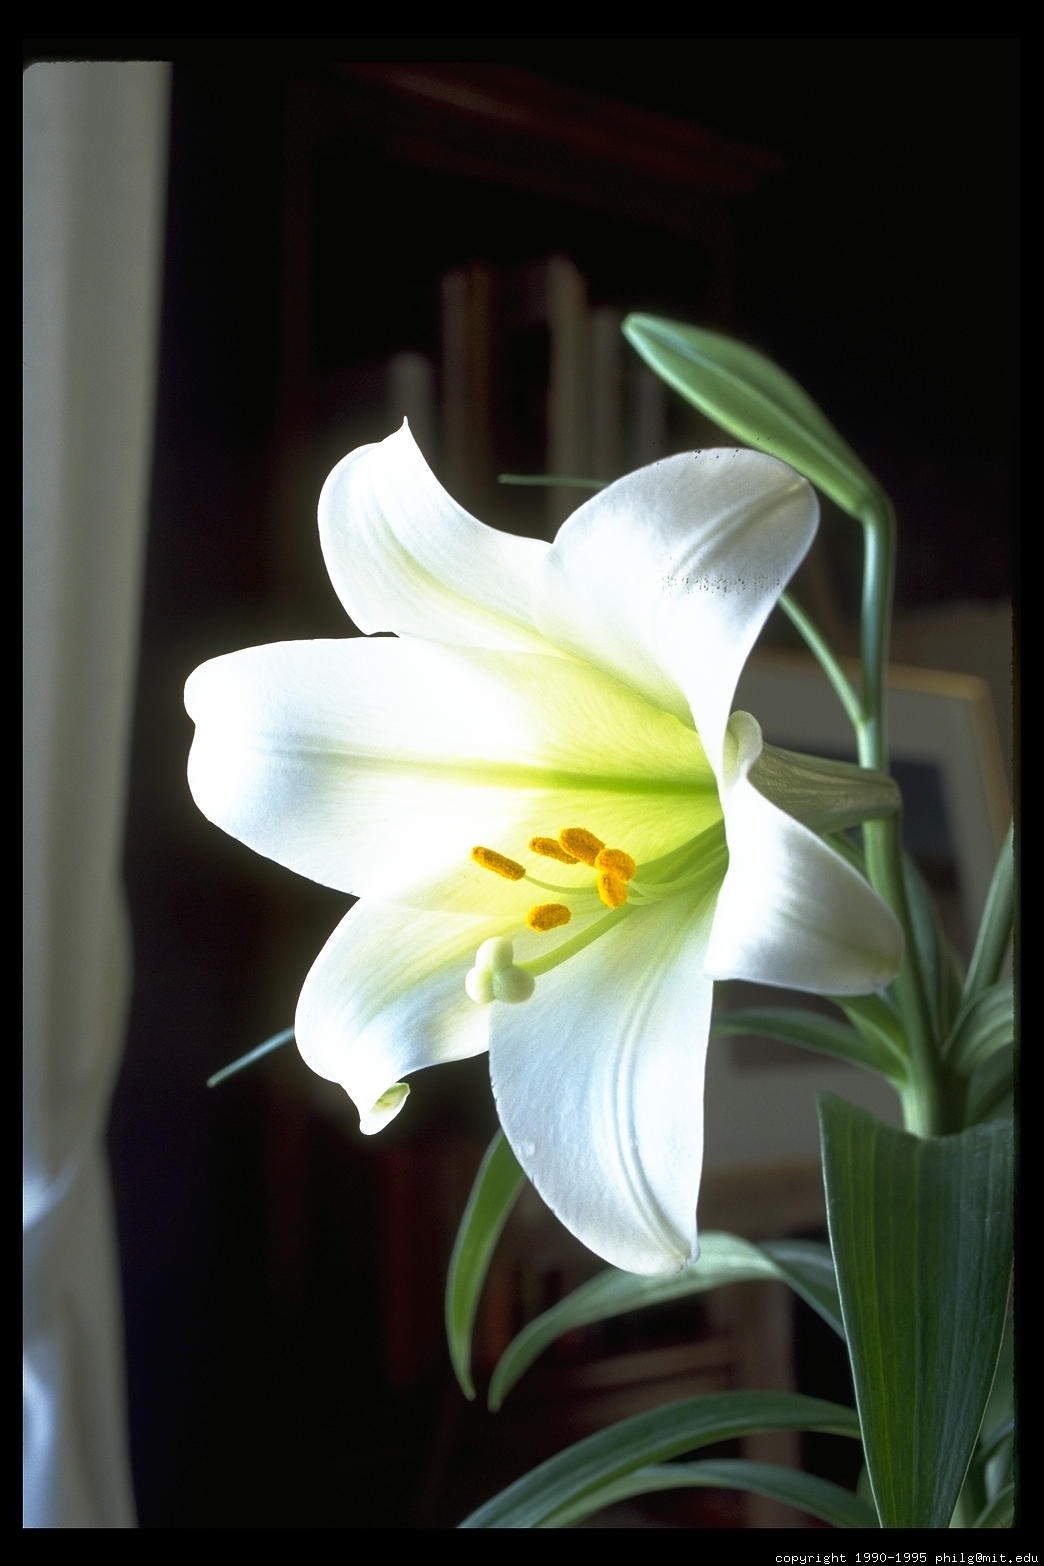 the Easter Lily